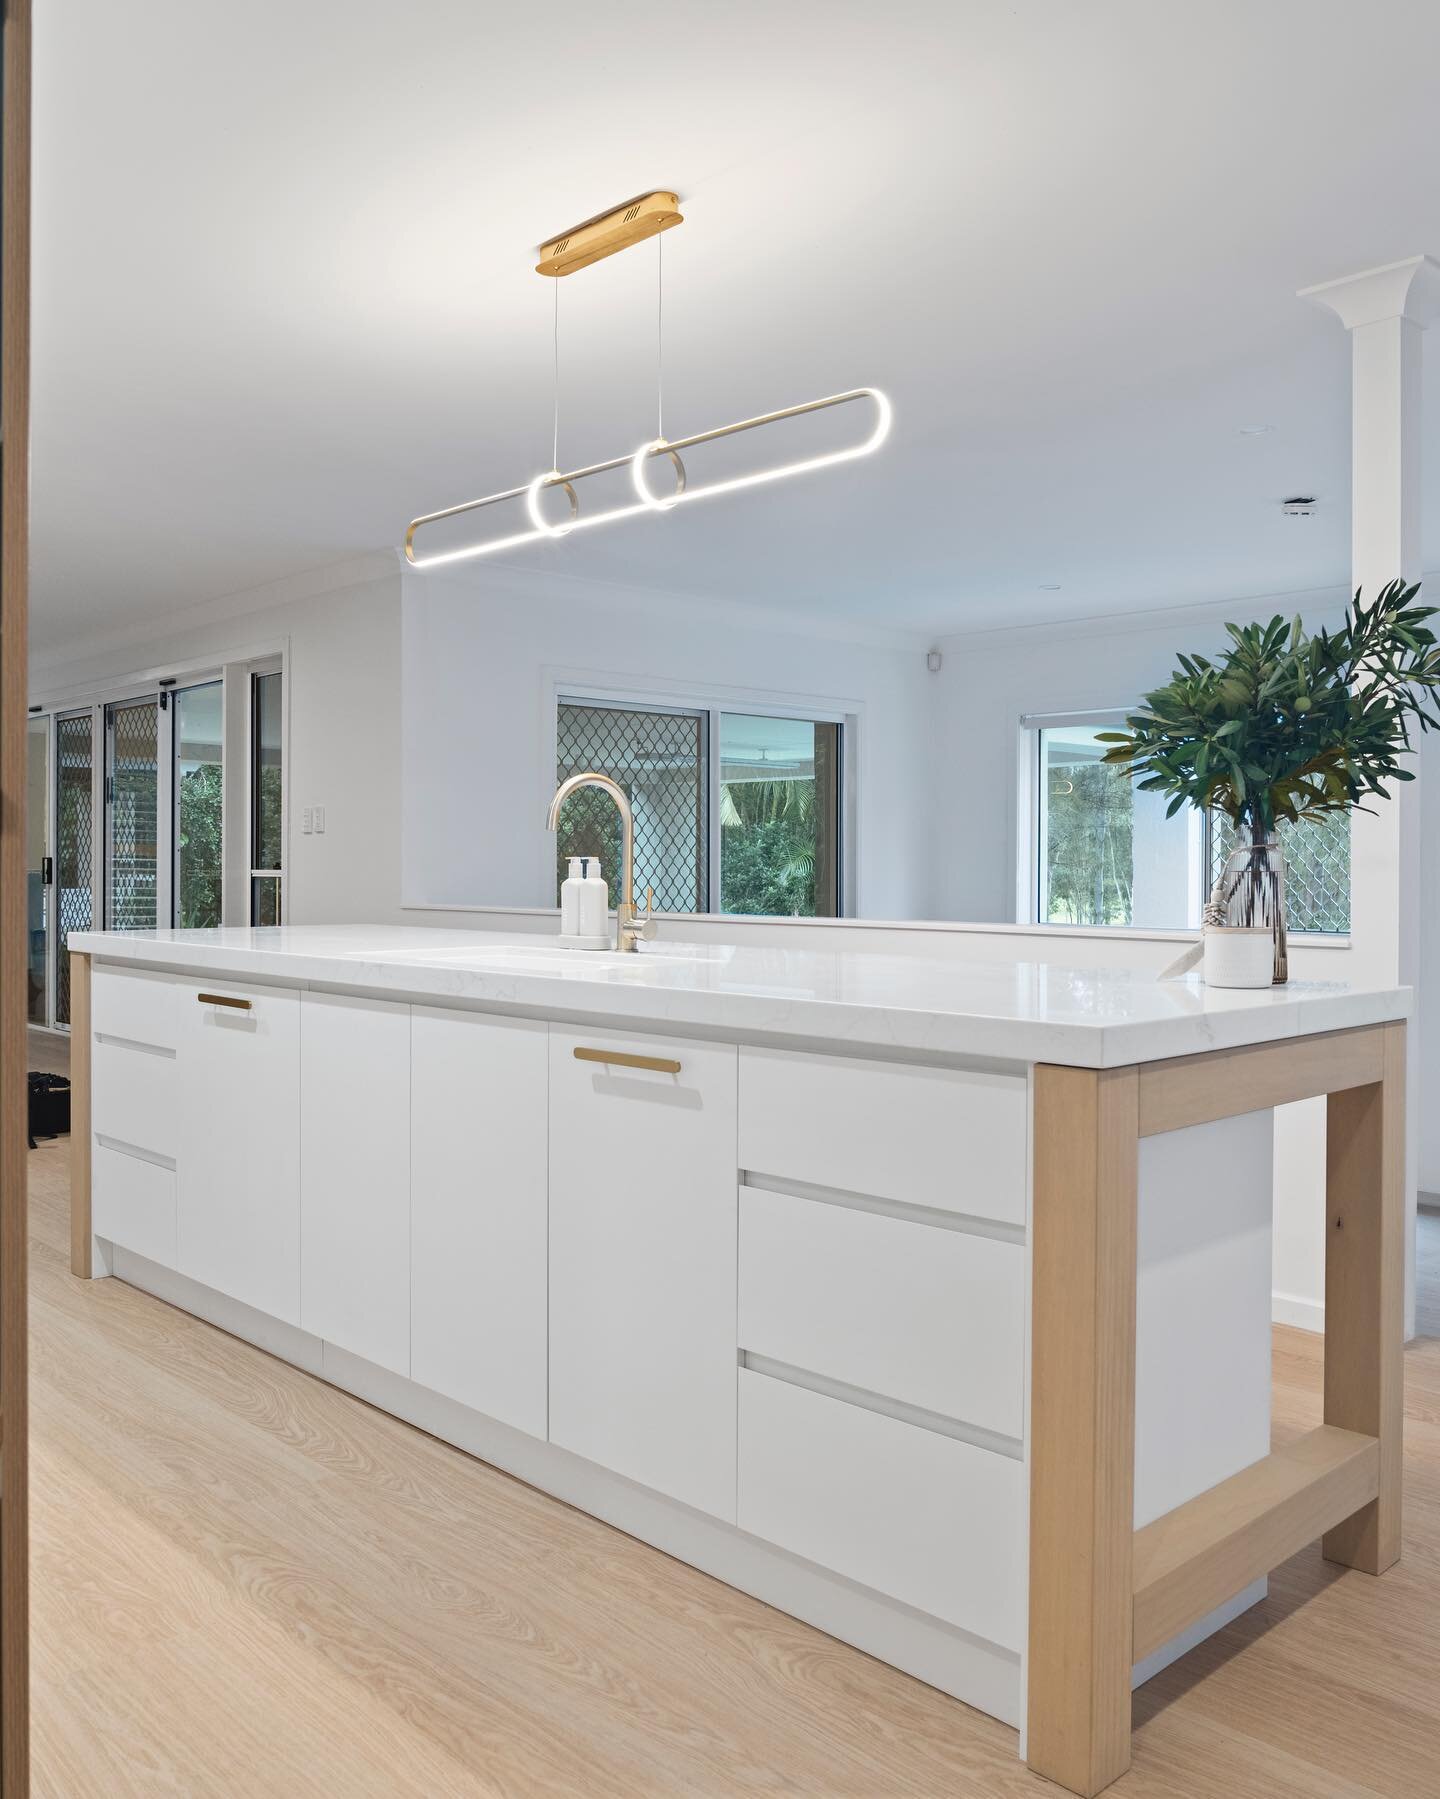 @haslhaus The Gold Coast Interior Renovation Specialists! 

Contact us today on 1300 780 532 or visit our showroom at 95 Ashmore Road, Bundall 4217 QLD.